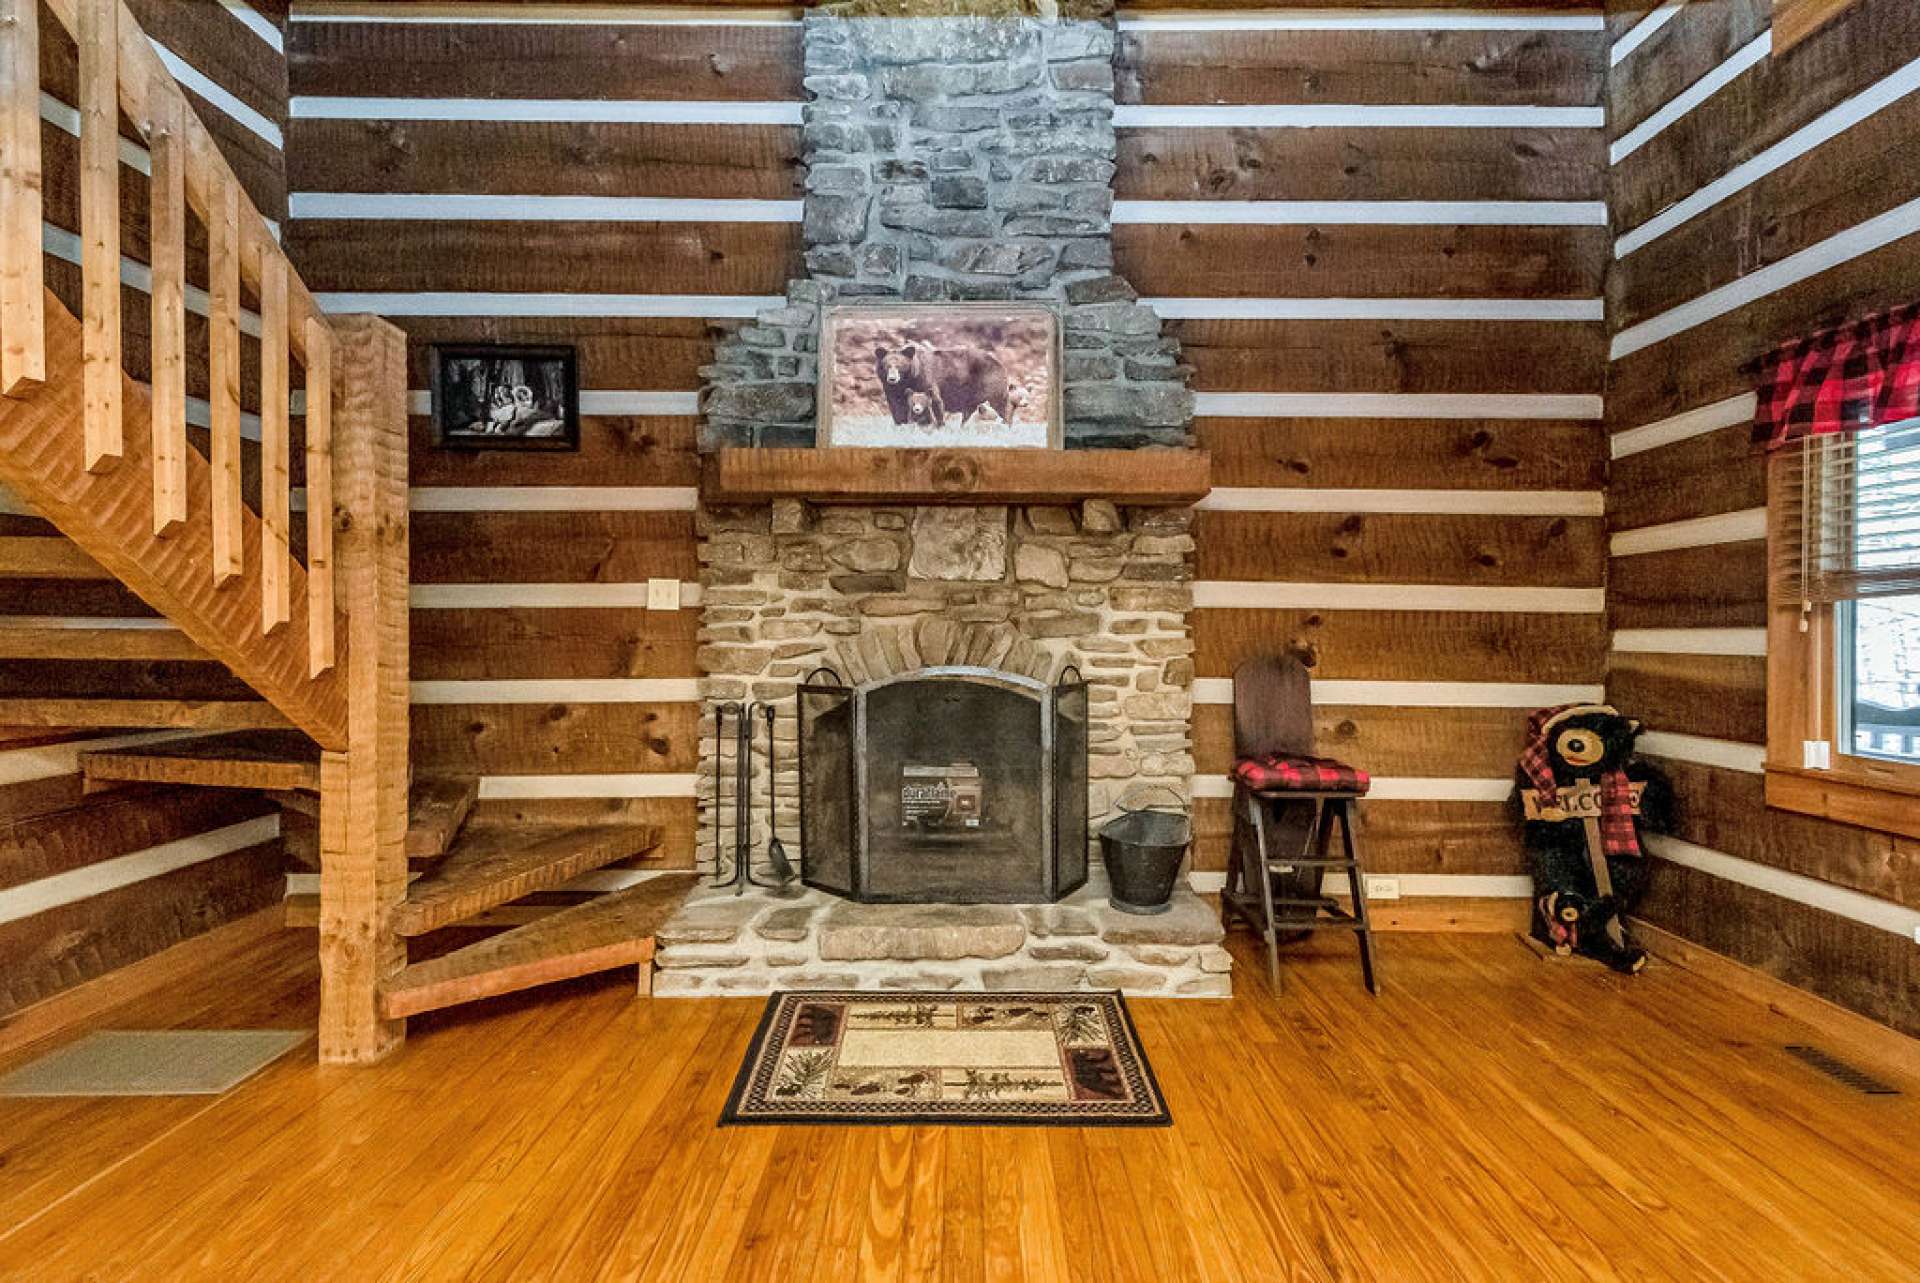 The two-story wood-burning fireplace is the focal point of the great room.